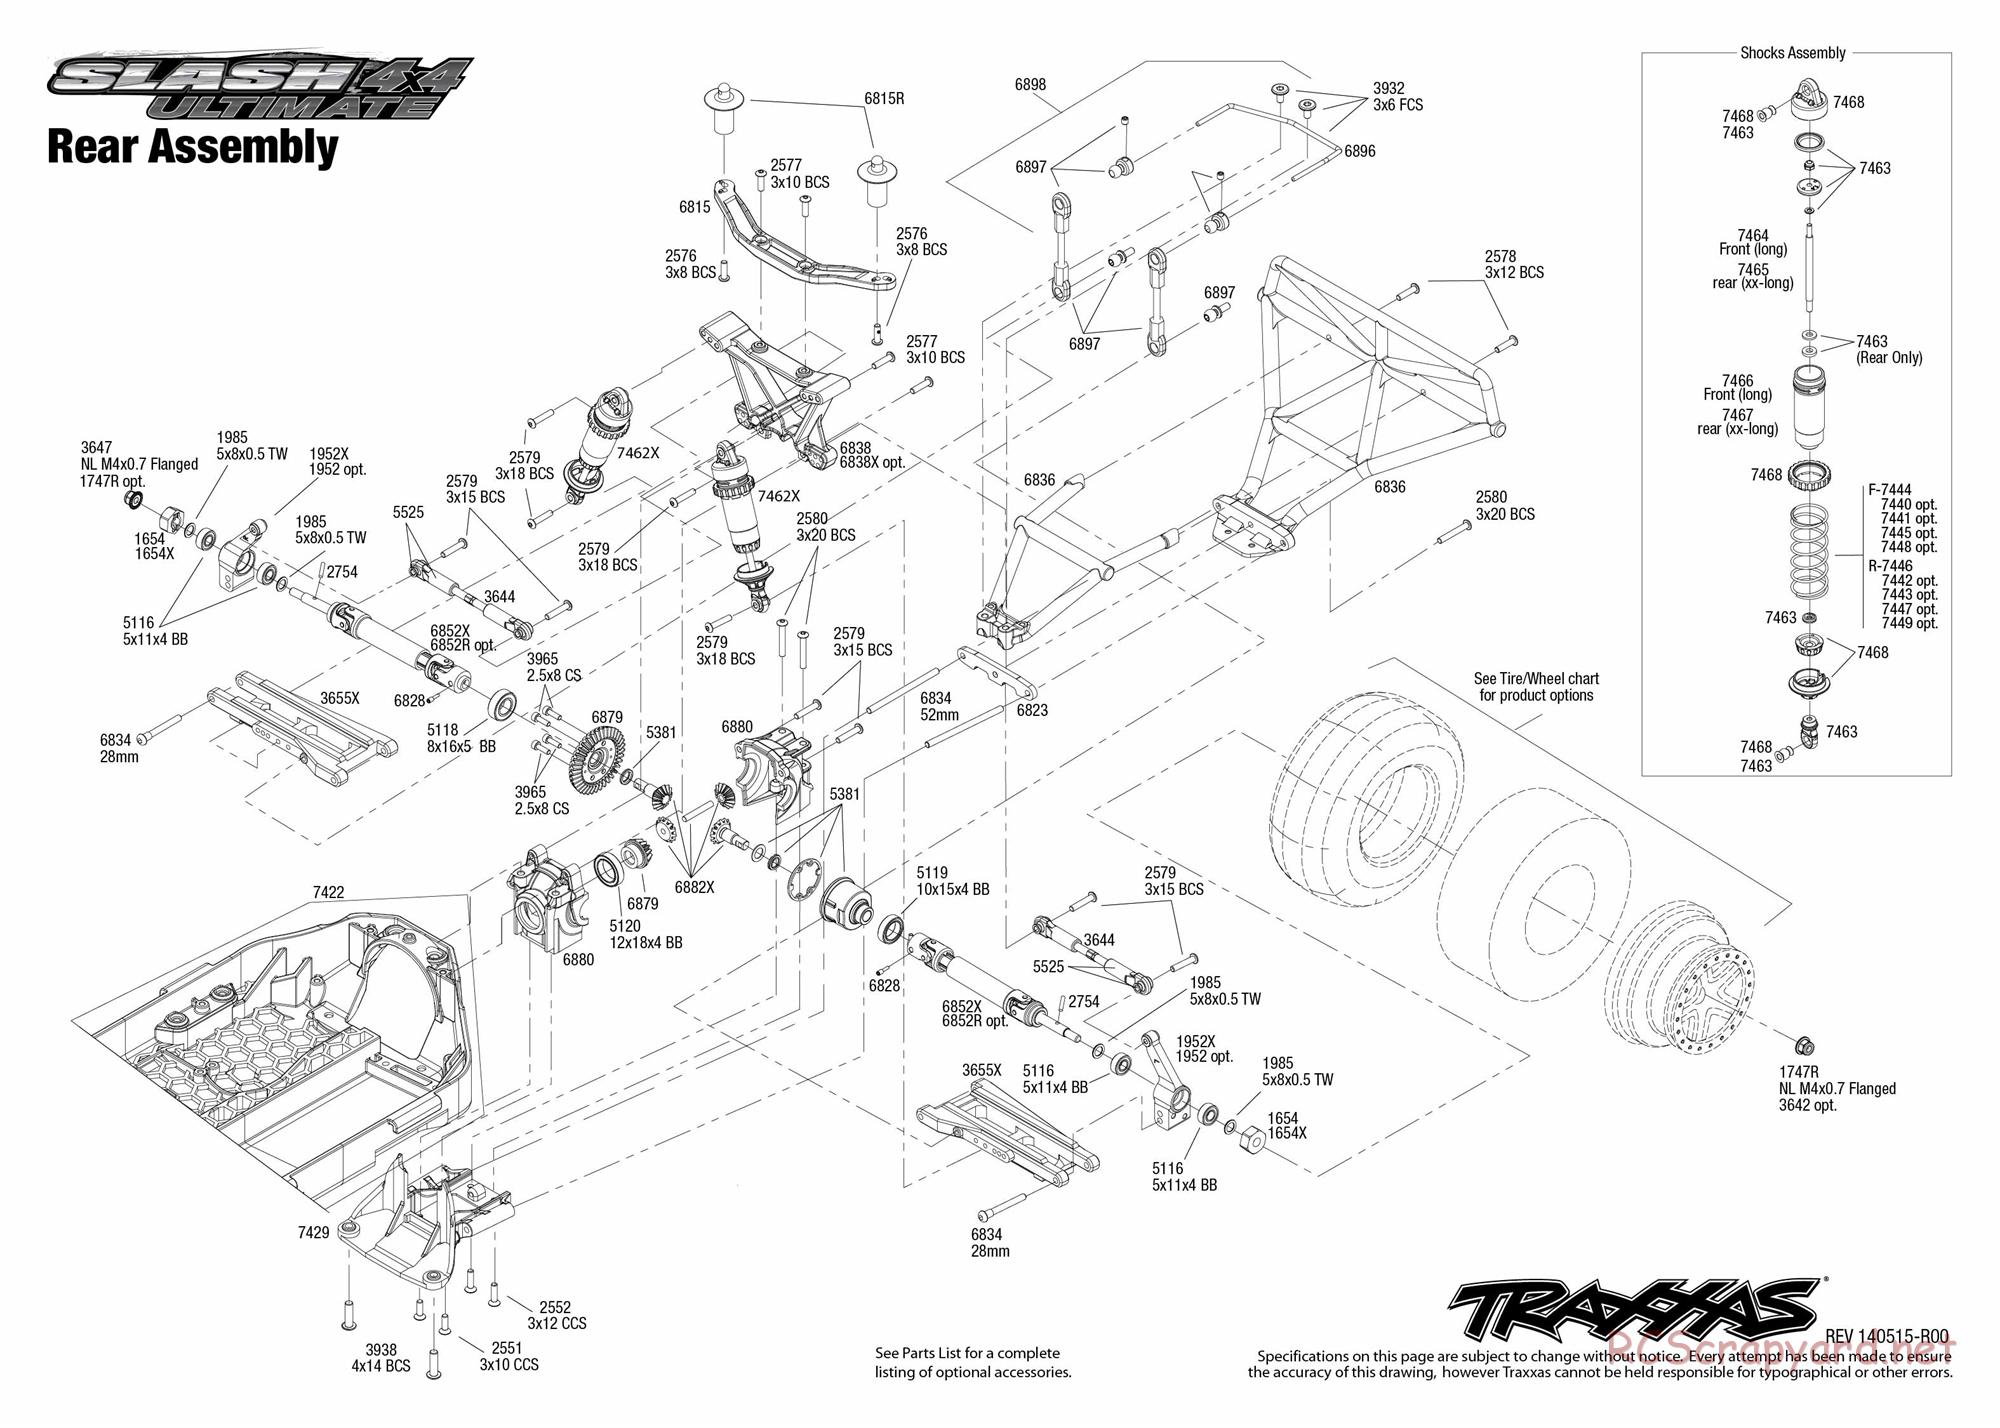 Traxxas - Slash 4x4 Ultimate (2014) - Exploded Views - Page 4